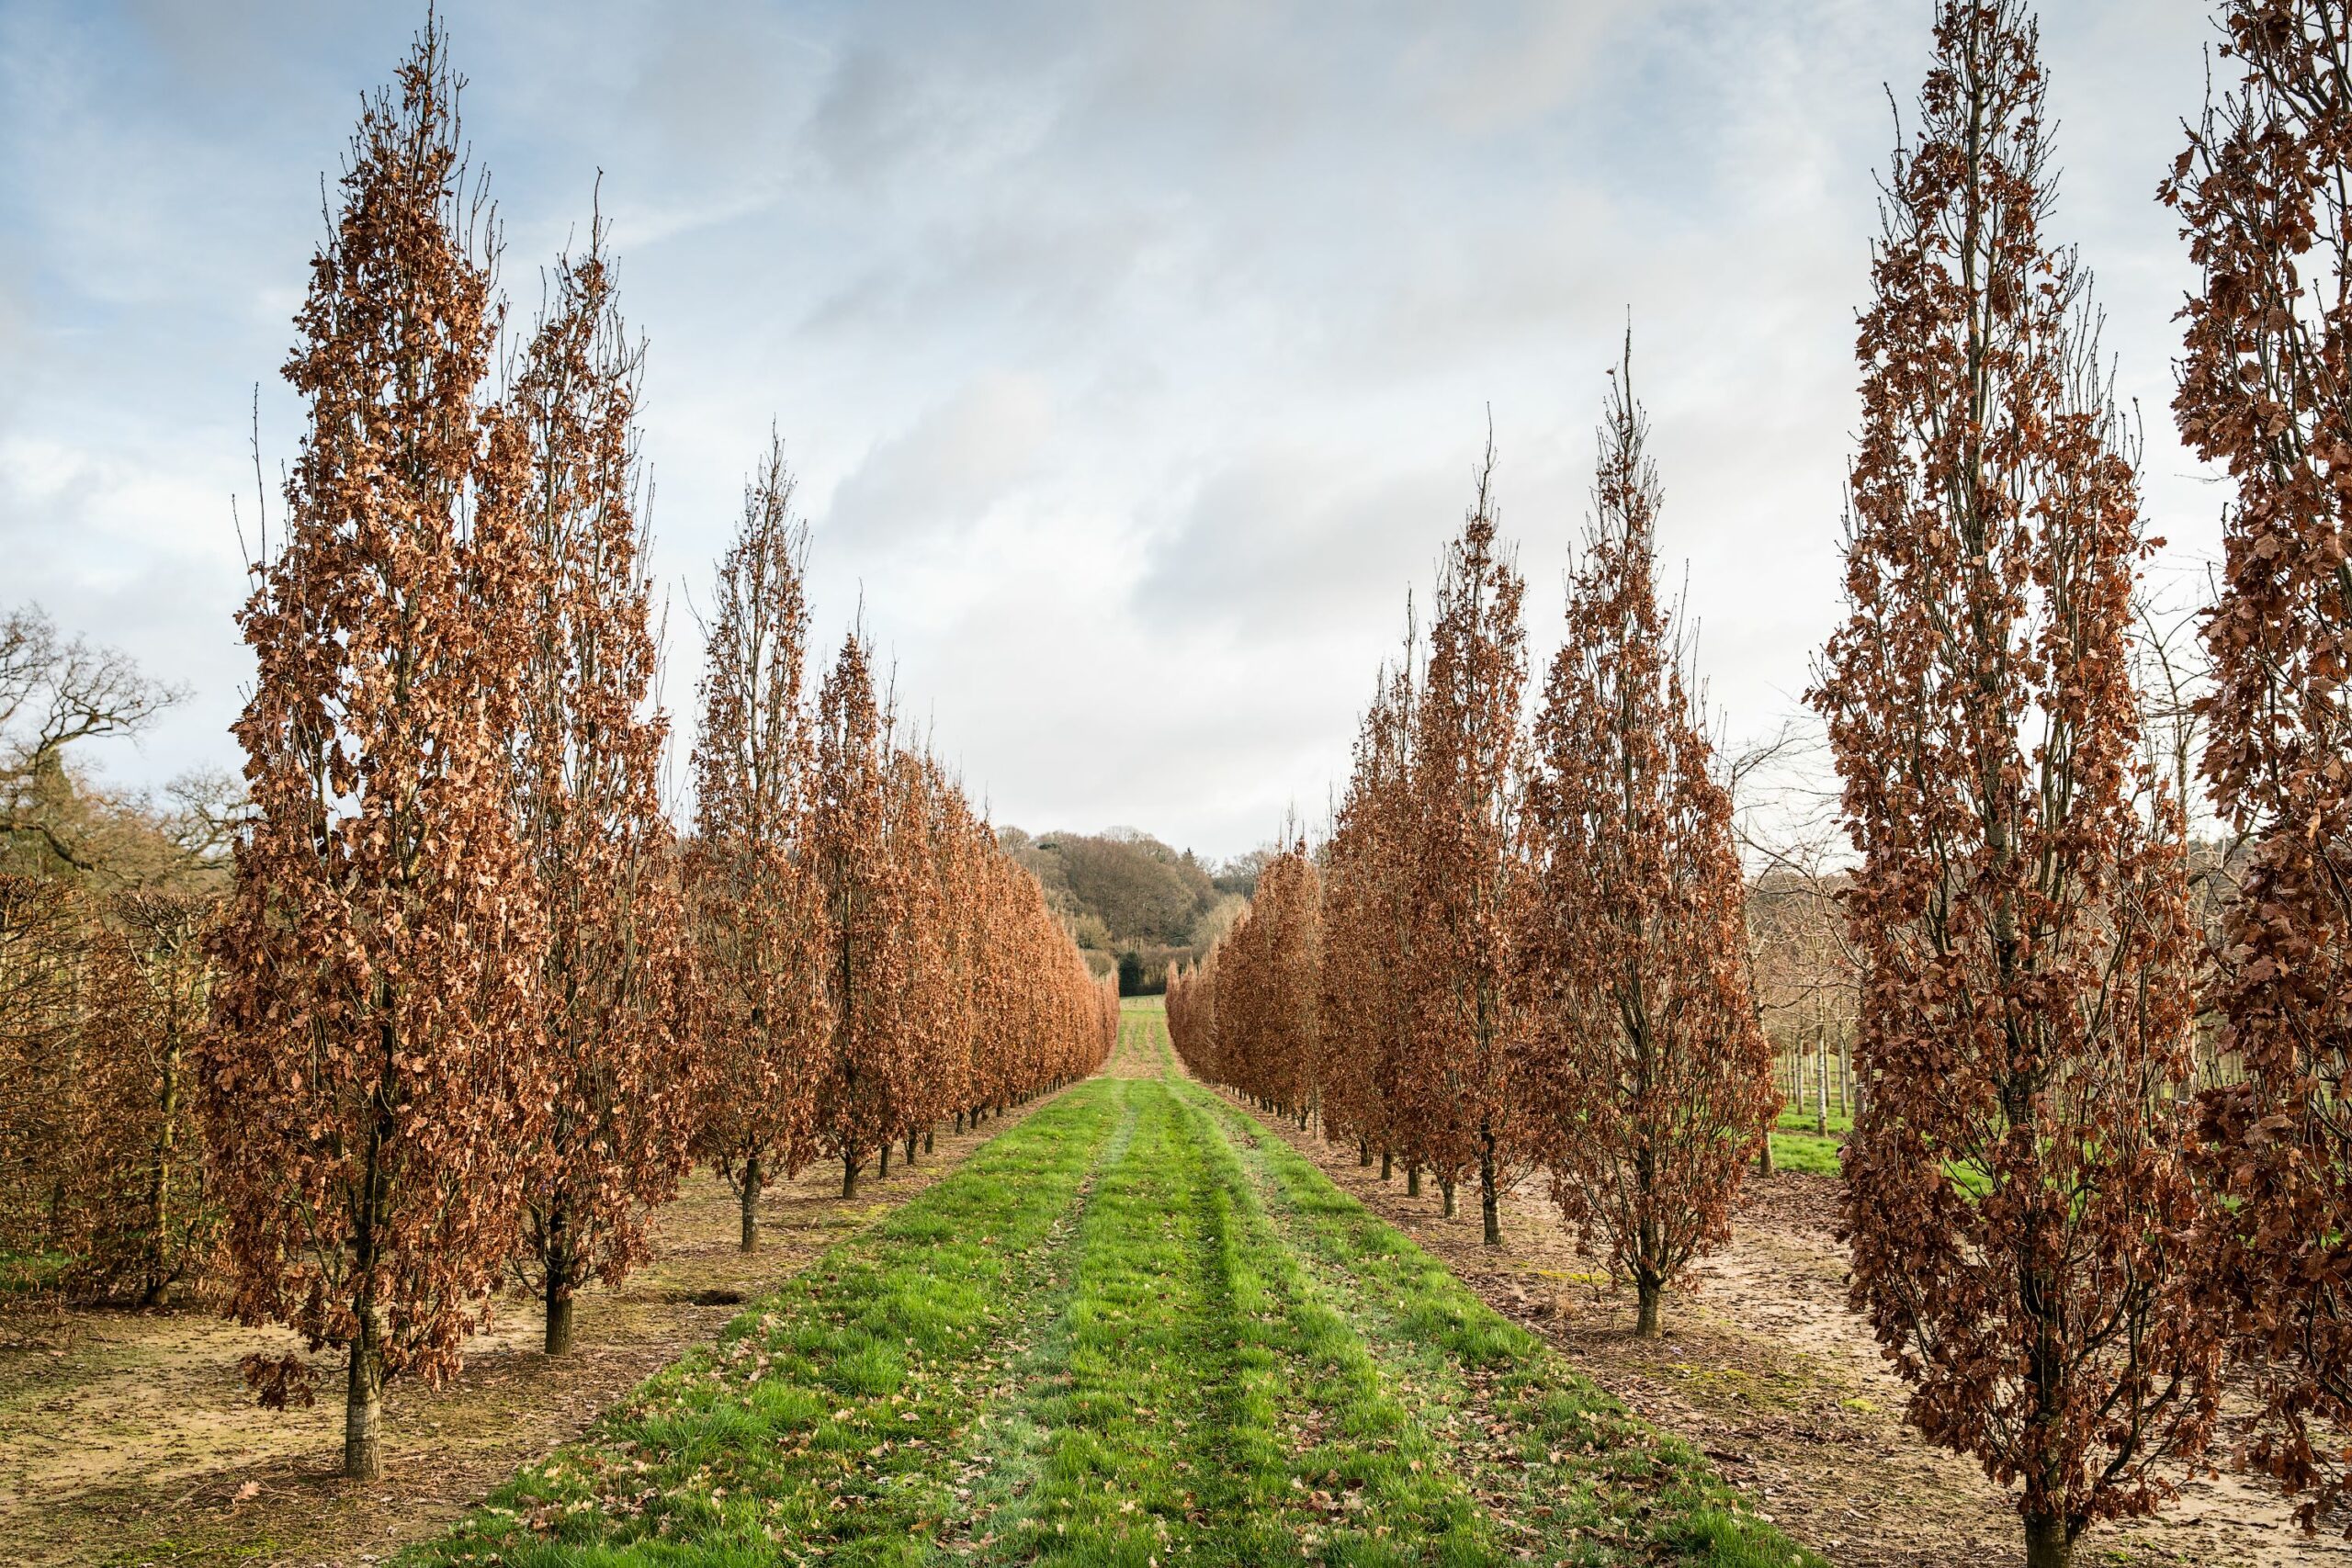 Quercus robur fastigiata Koster feathered trees growing in rows in field in autumn